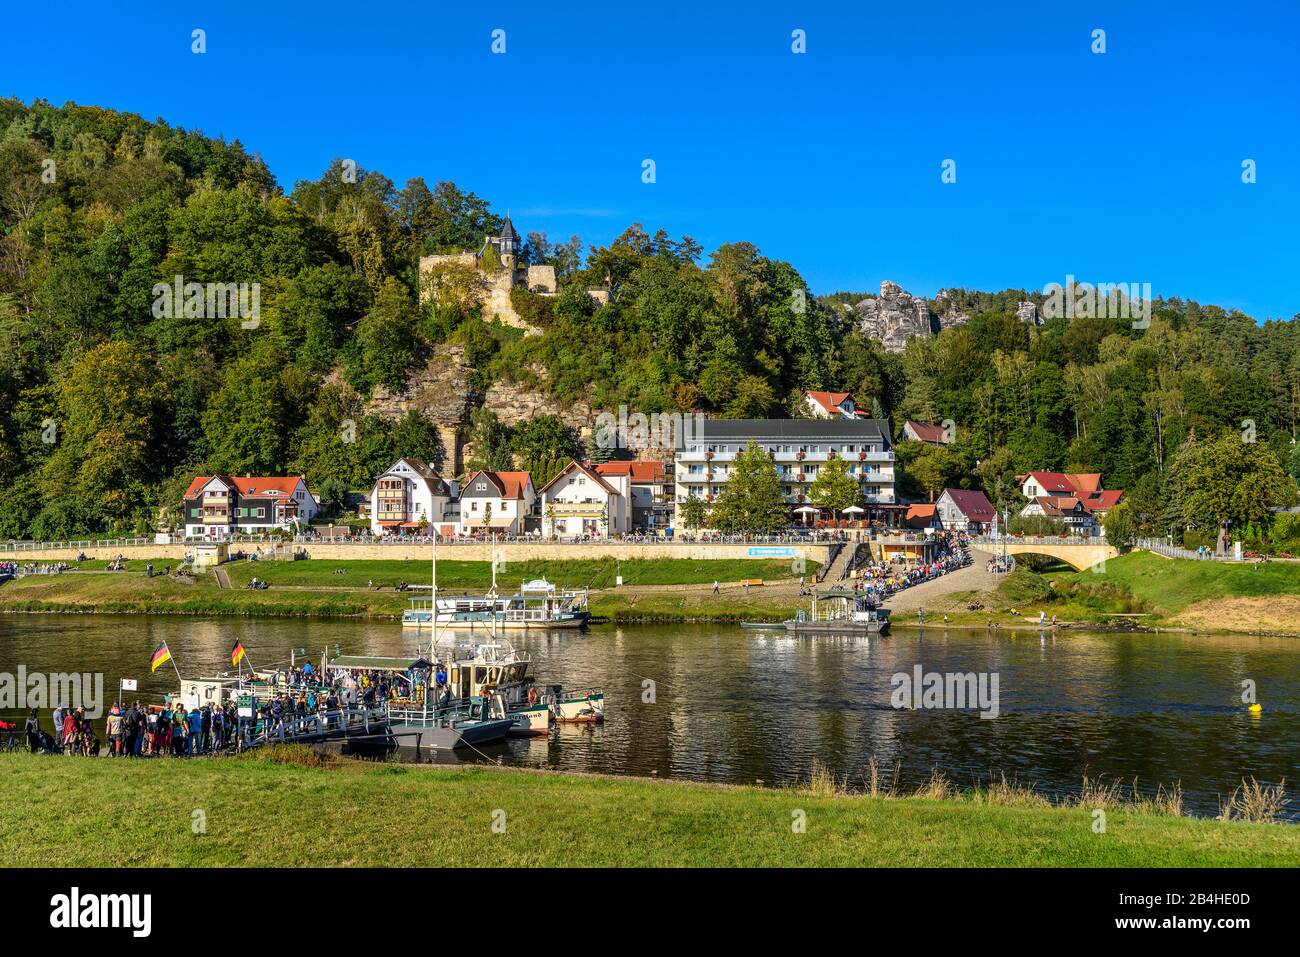 Page 2 - Fähre Elbe High Resolution Stock Photography and Images - Alamy